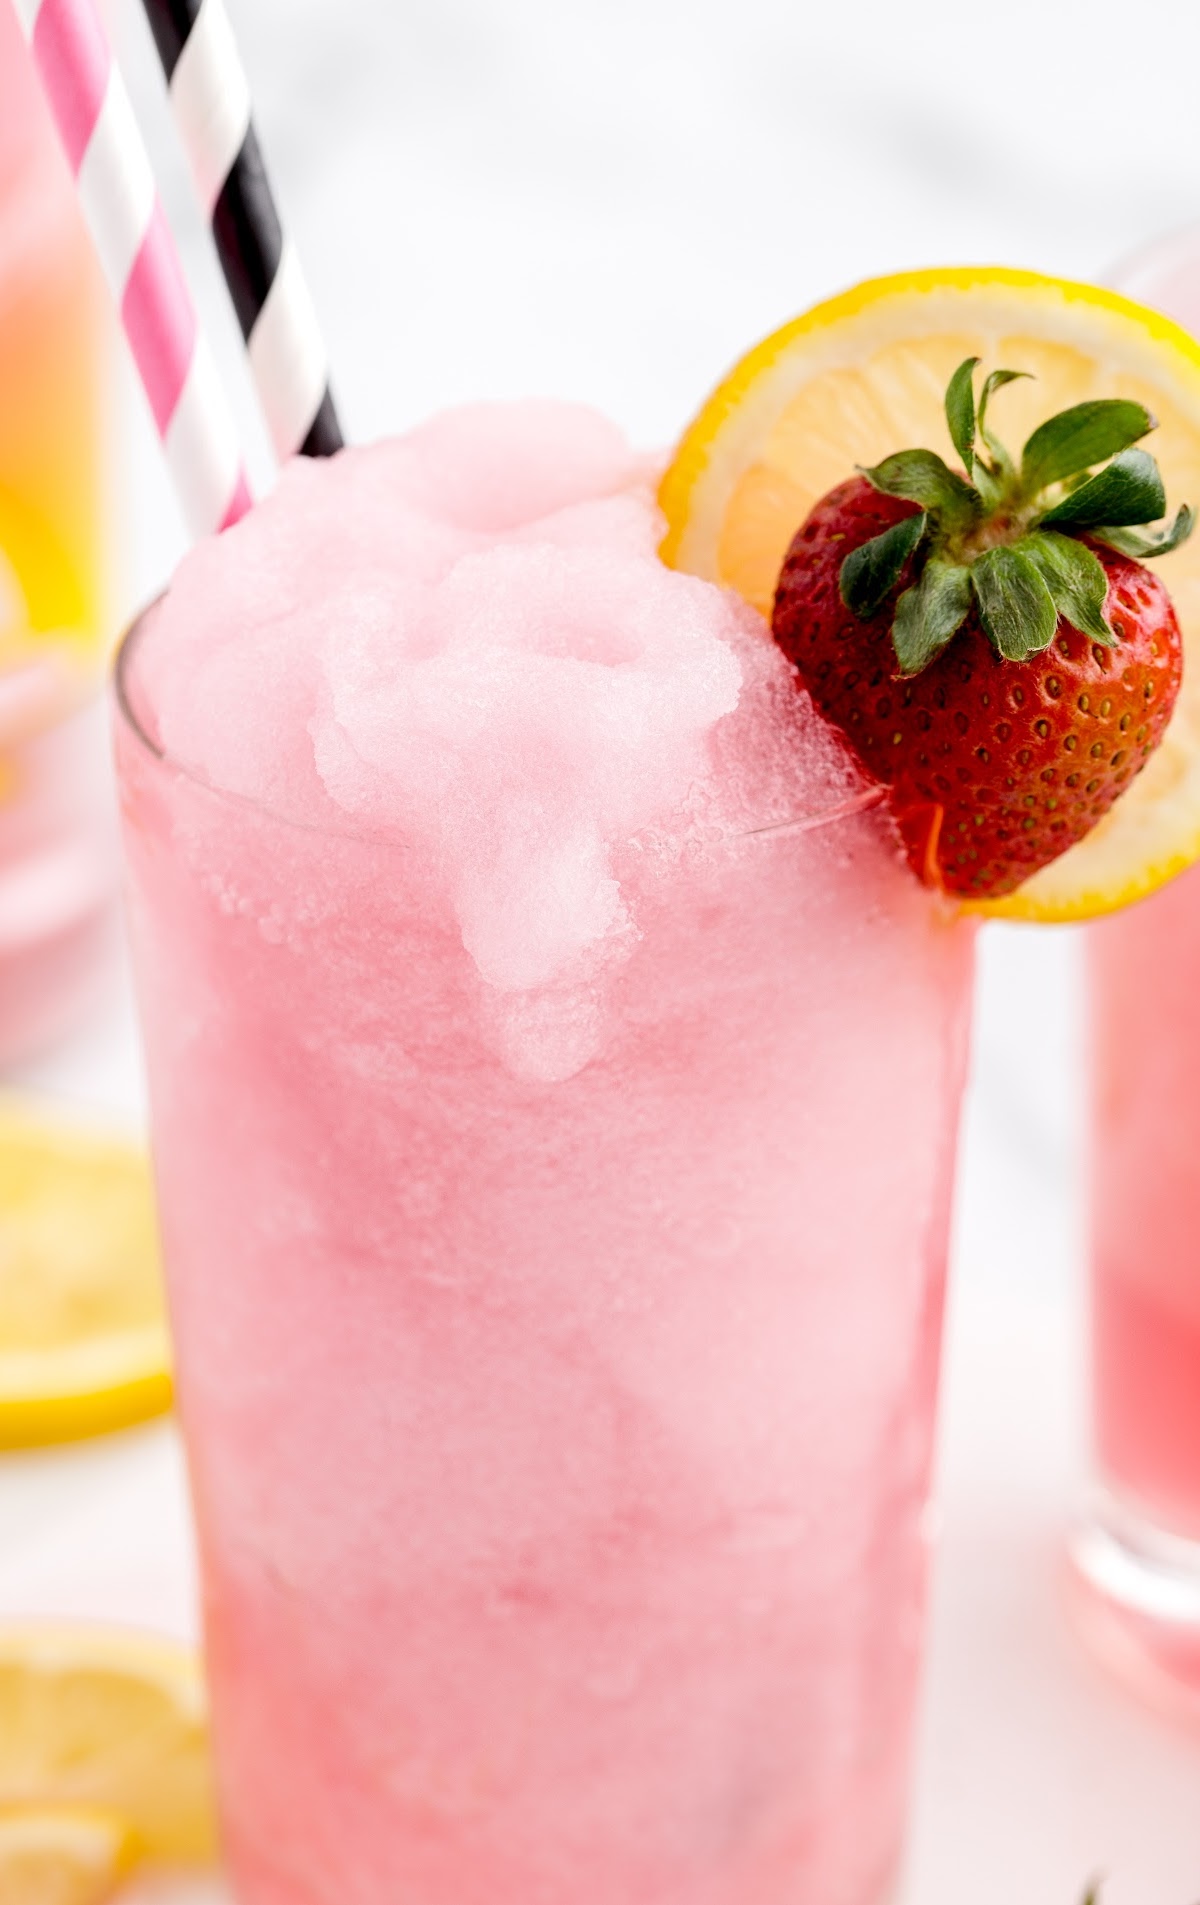 Strawberry Lemonade Cocktail in a glass with a slice of lemon and strawberry in a glass